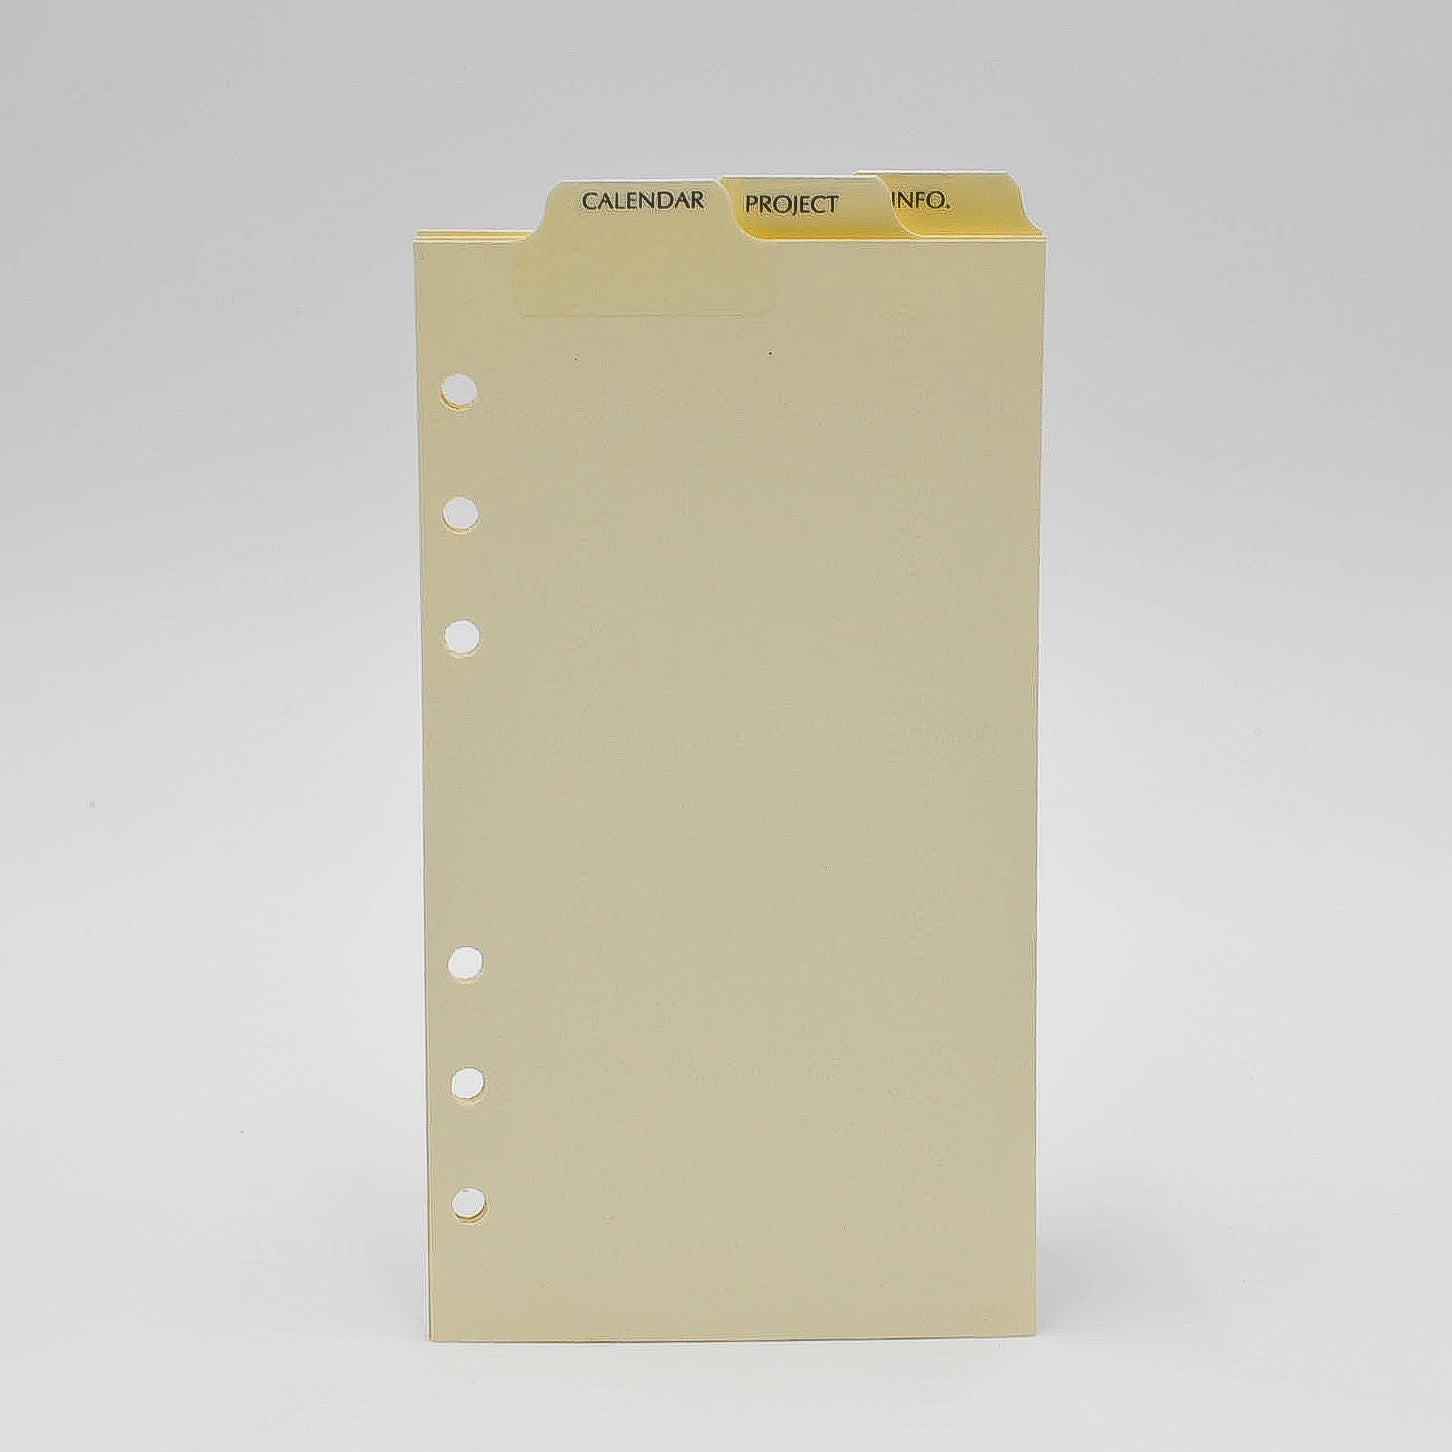 Top Tabs: MT46P6I 6-3/4" X 3-3/4" 6-Ring ivory 6 hole mp46p6 pd646 supplement laminated